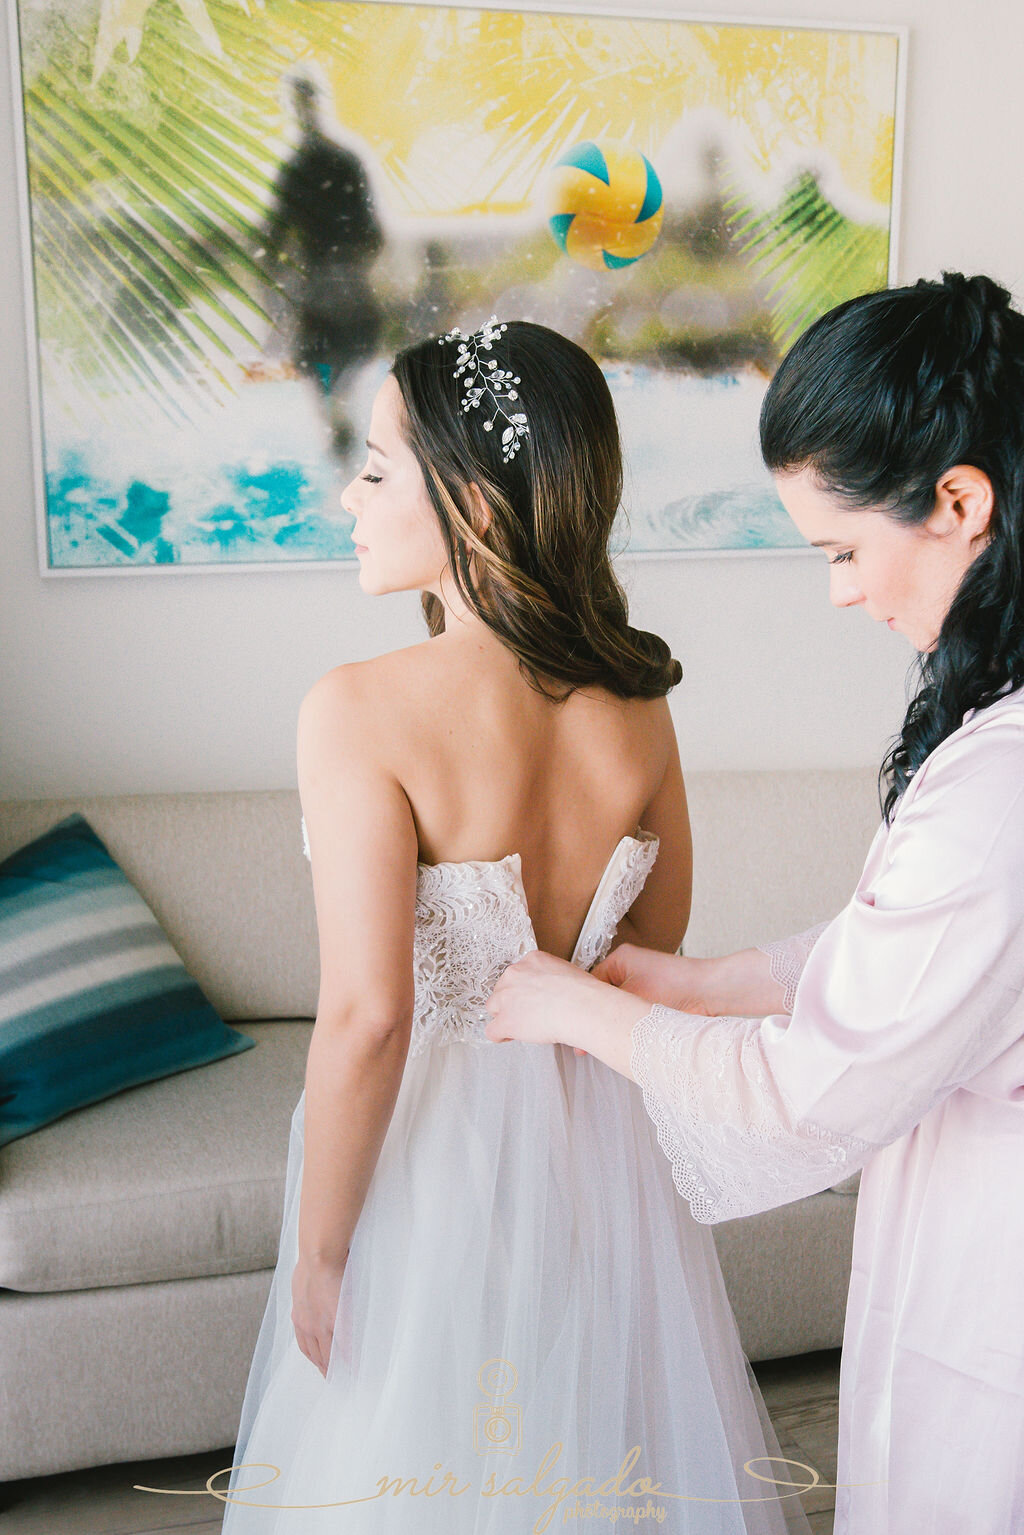 bridal-dress-getting-ready-photography, bridal-dress, bride-dress, bridal-dress-photography, bride-and-sister-in-law